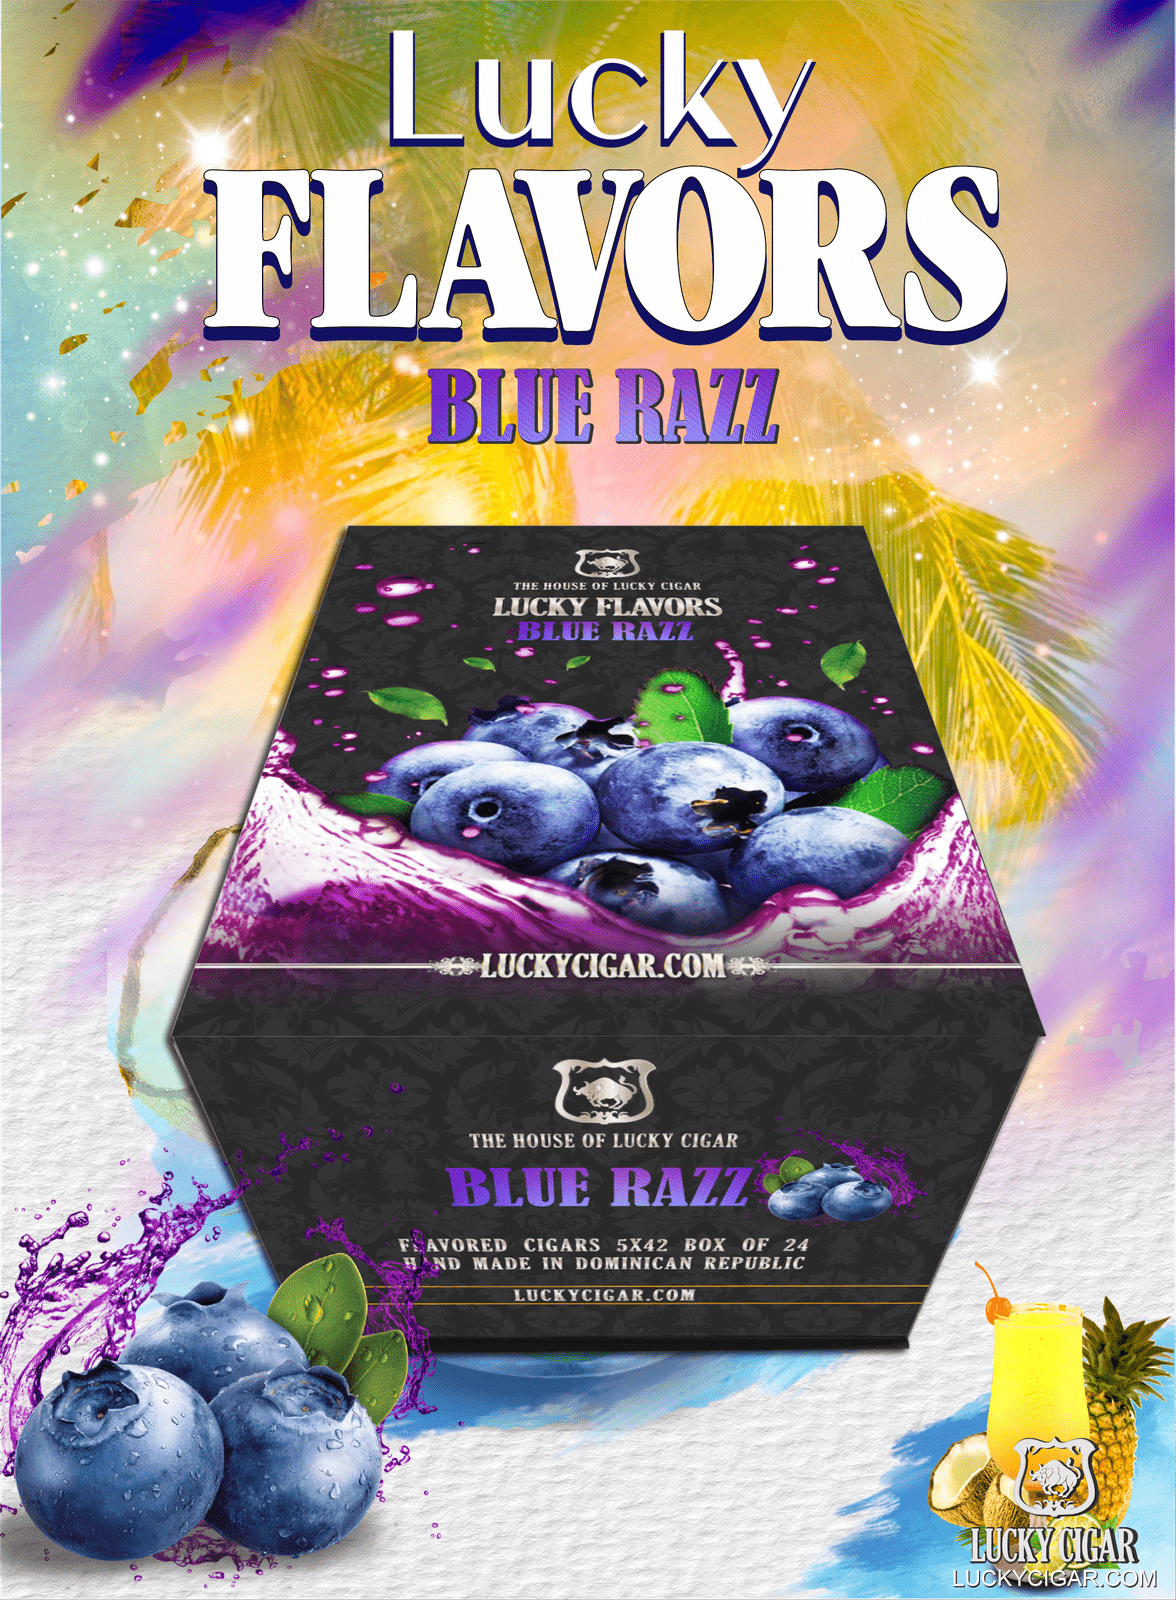 Flavored Cigars: Lucky Flavors Blue Razz 5x42 Box of 24